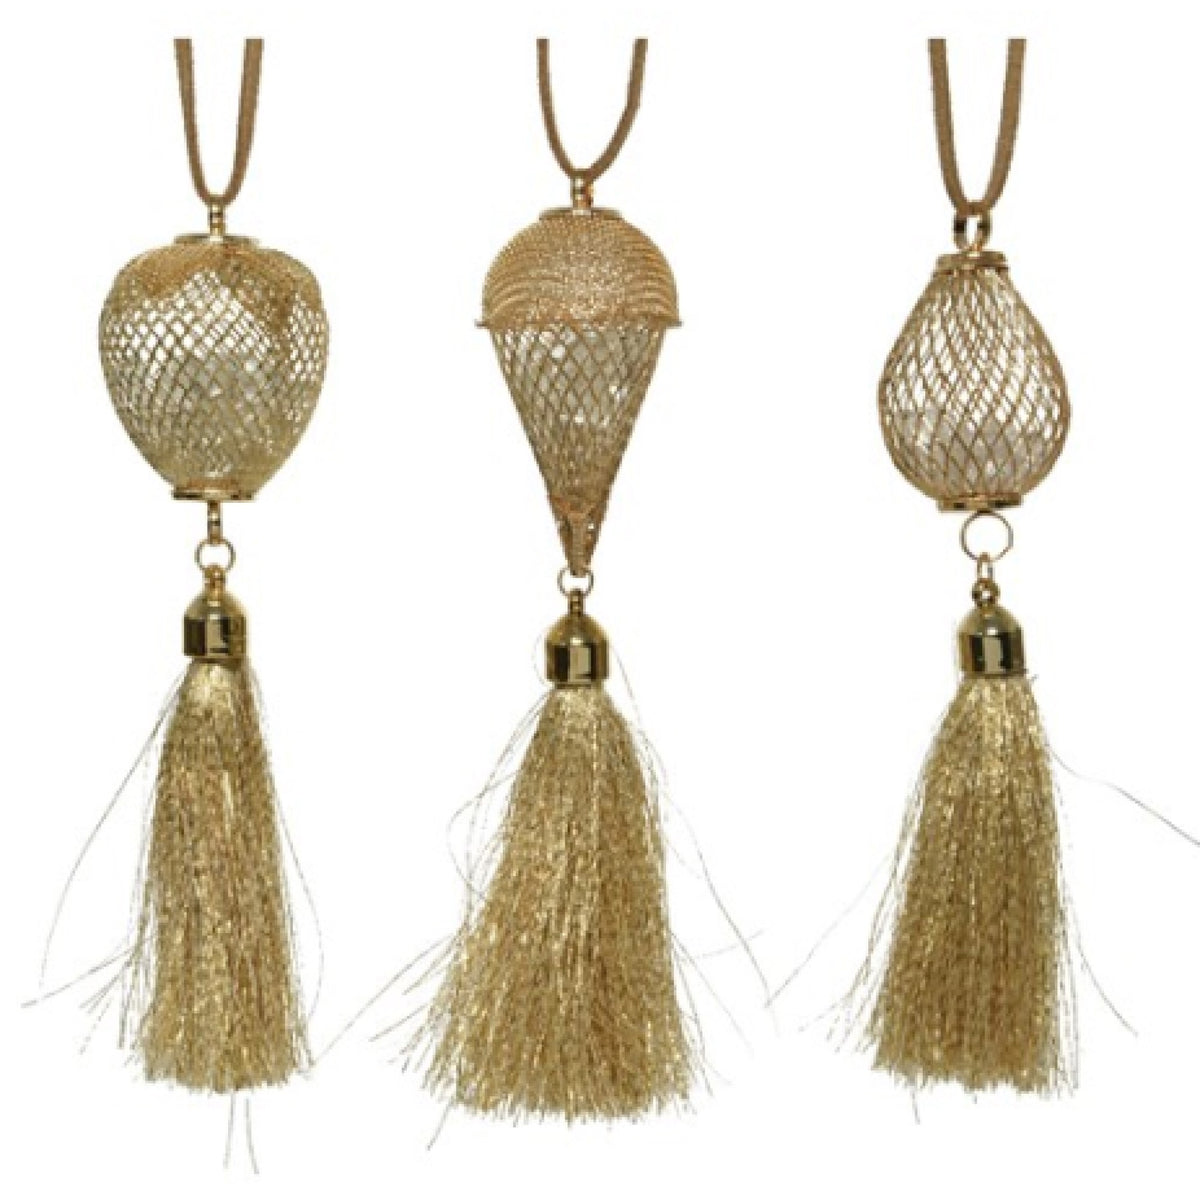 Pack of 3 Assorted Gold Christmas Tree Decorations with Tassels